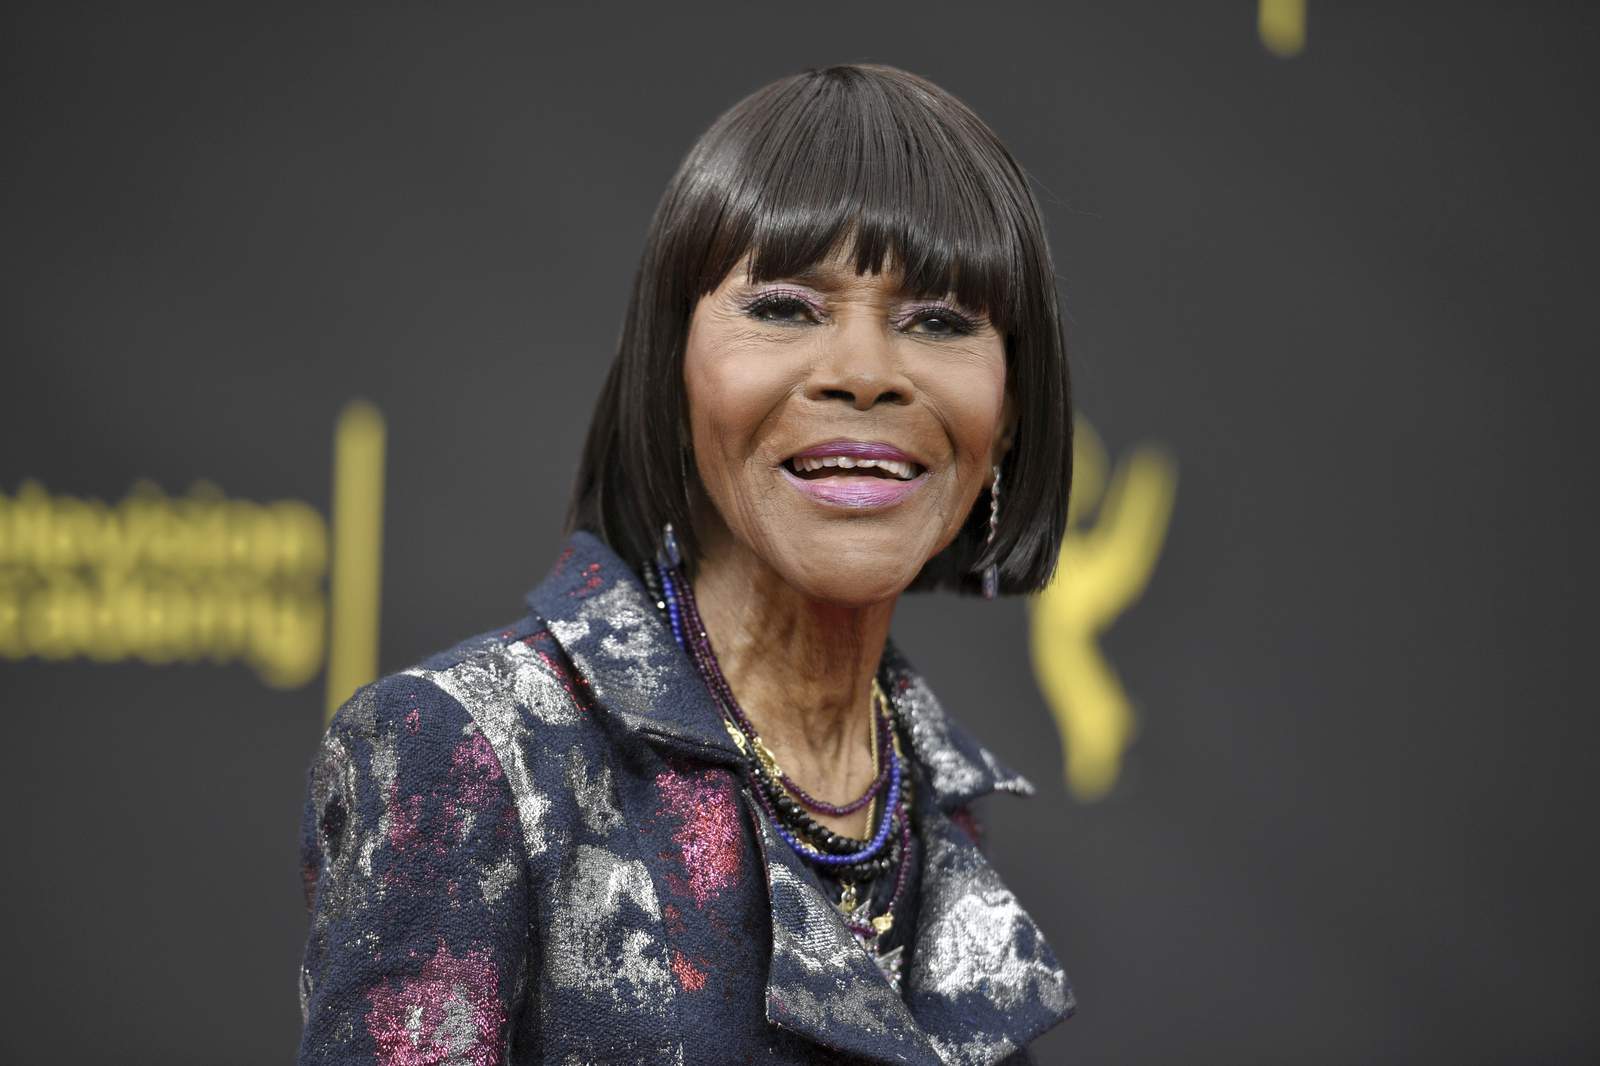 Cicely Tyson, purposeful and pioneering actor, dead at 96